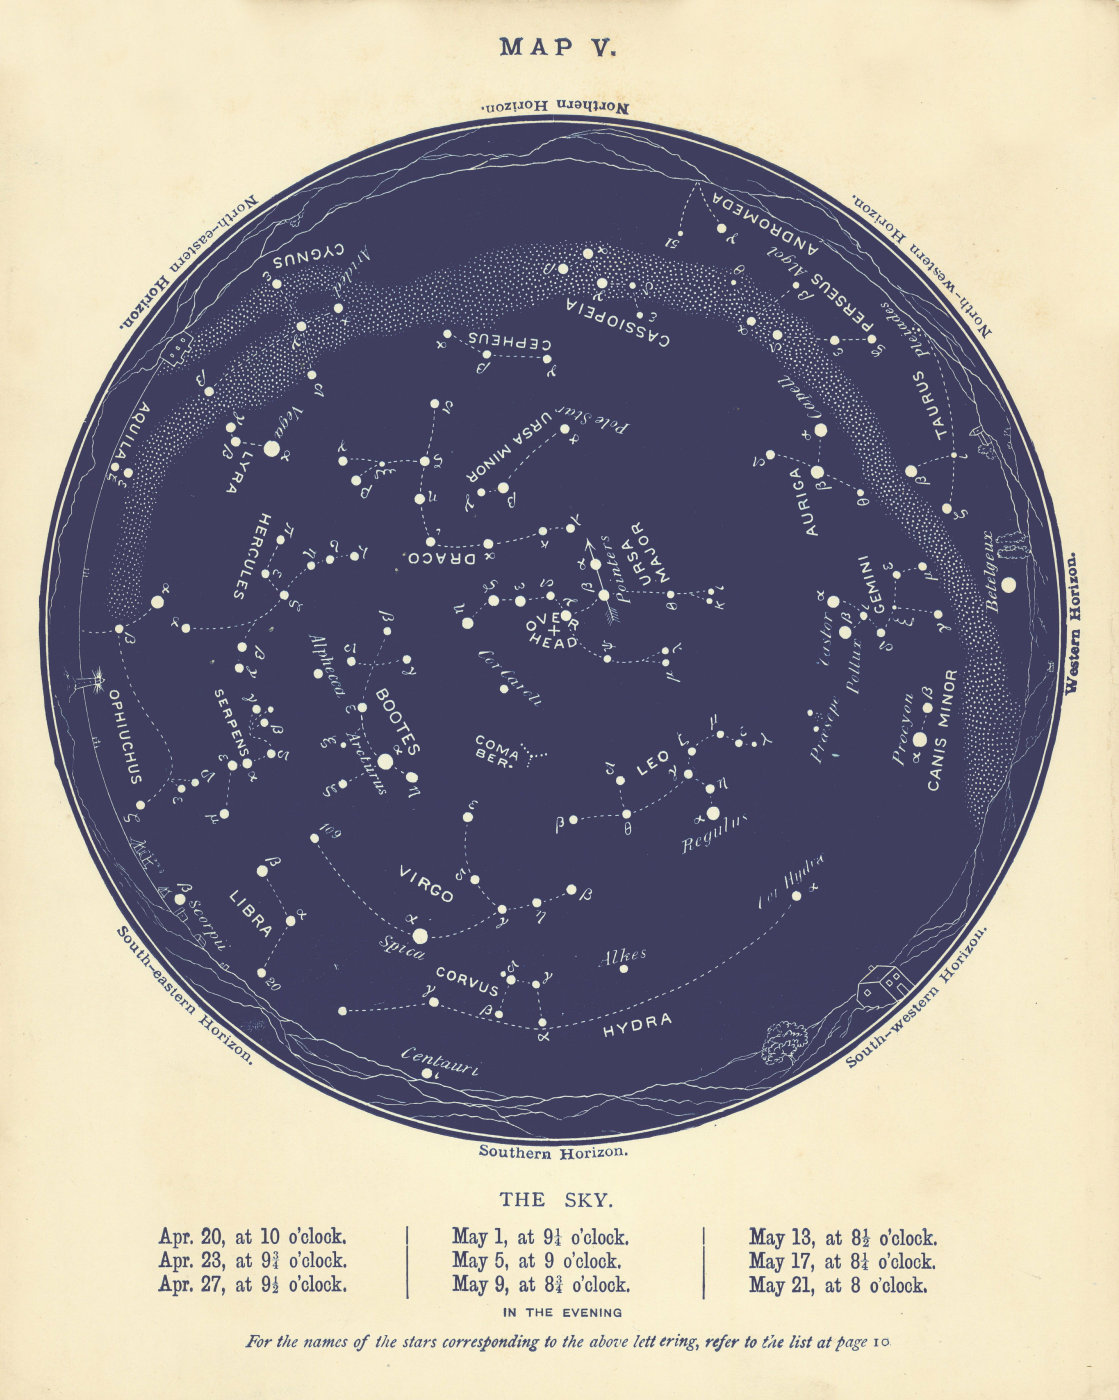 Associate Product STAR MAP V. The Night Sky. April-May. Astronomy. PROCTOR 1896 old antique